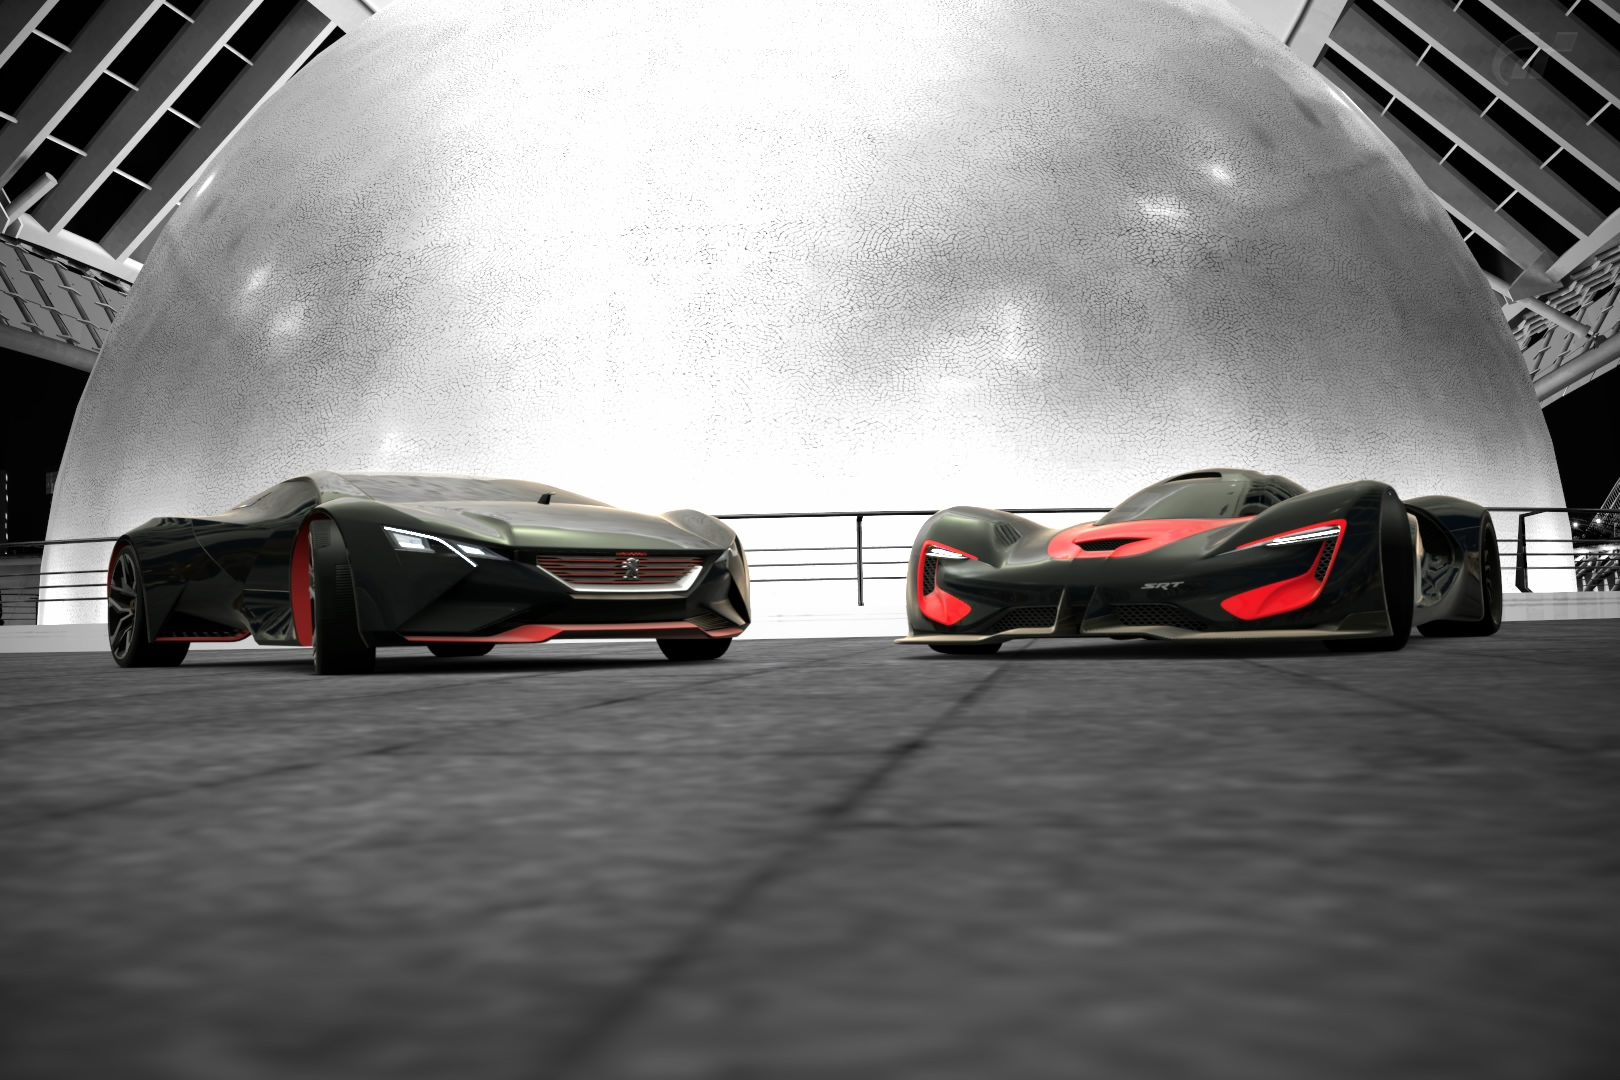 Red Heads From The Future Peugeot Vgt And Srt Tomahawk X At Valencia